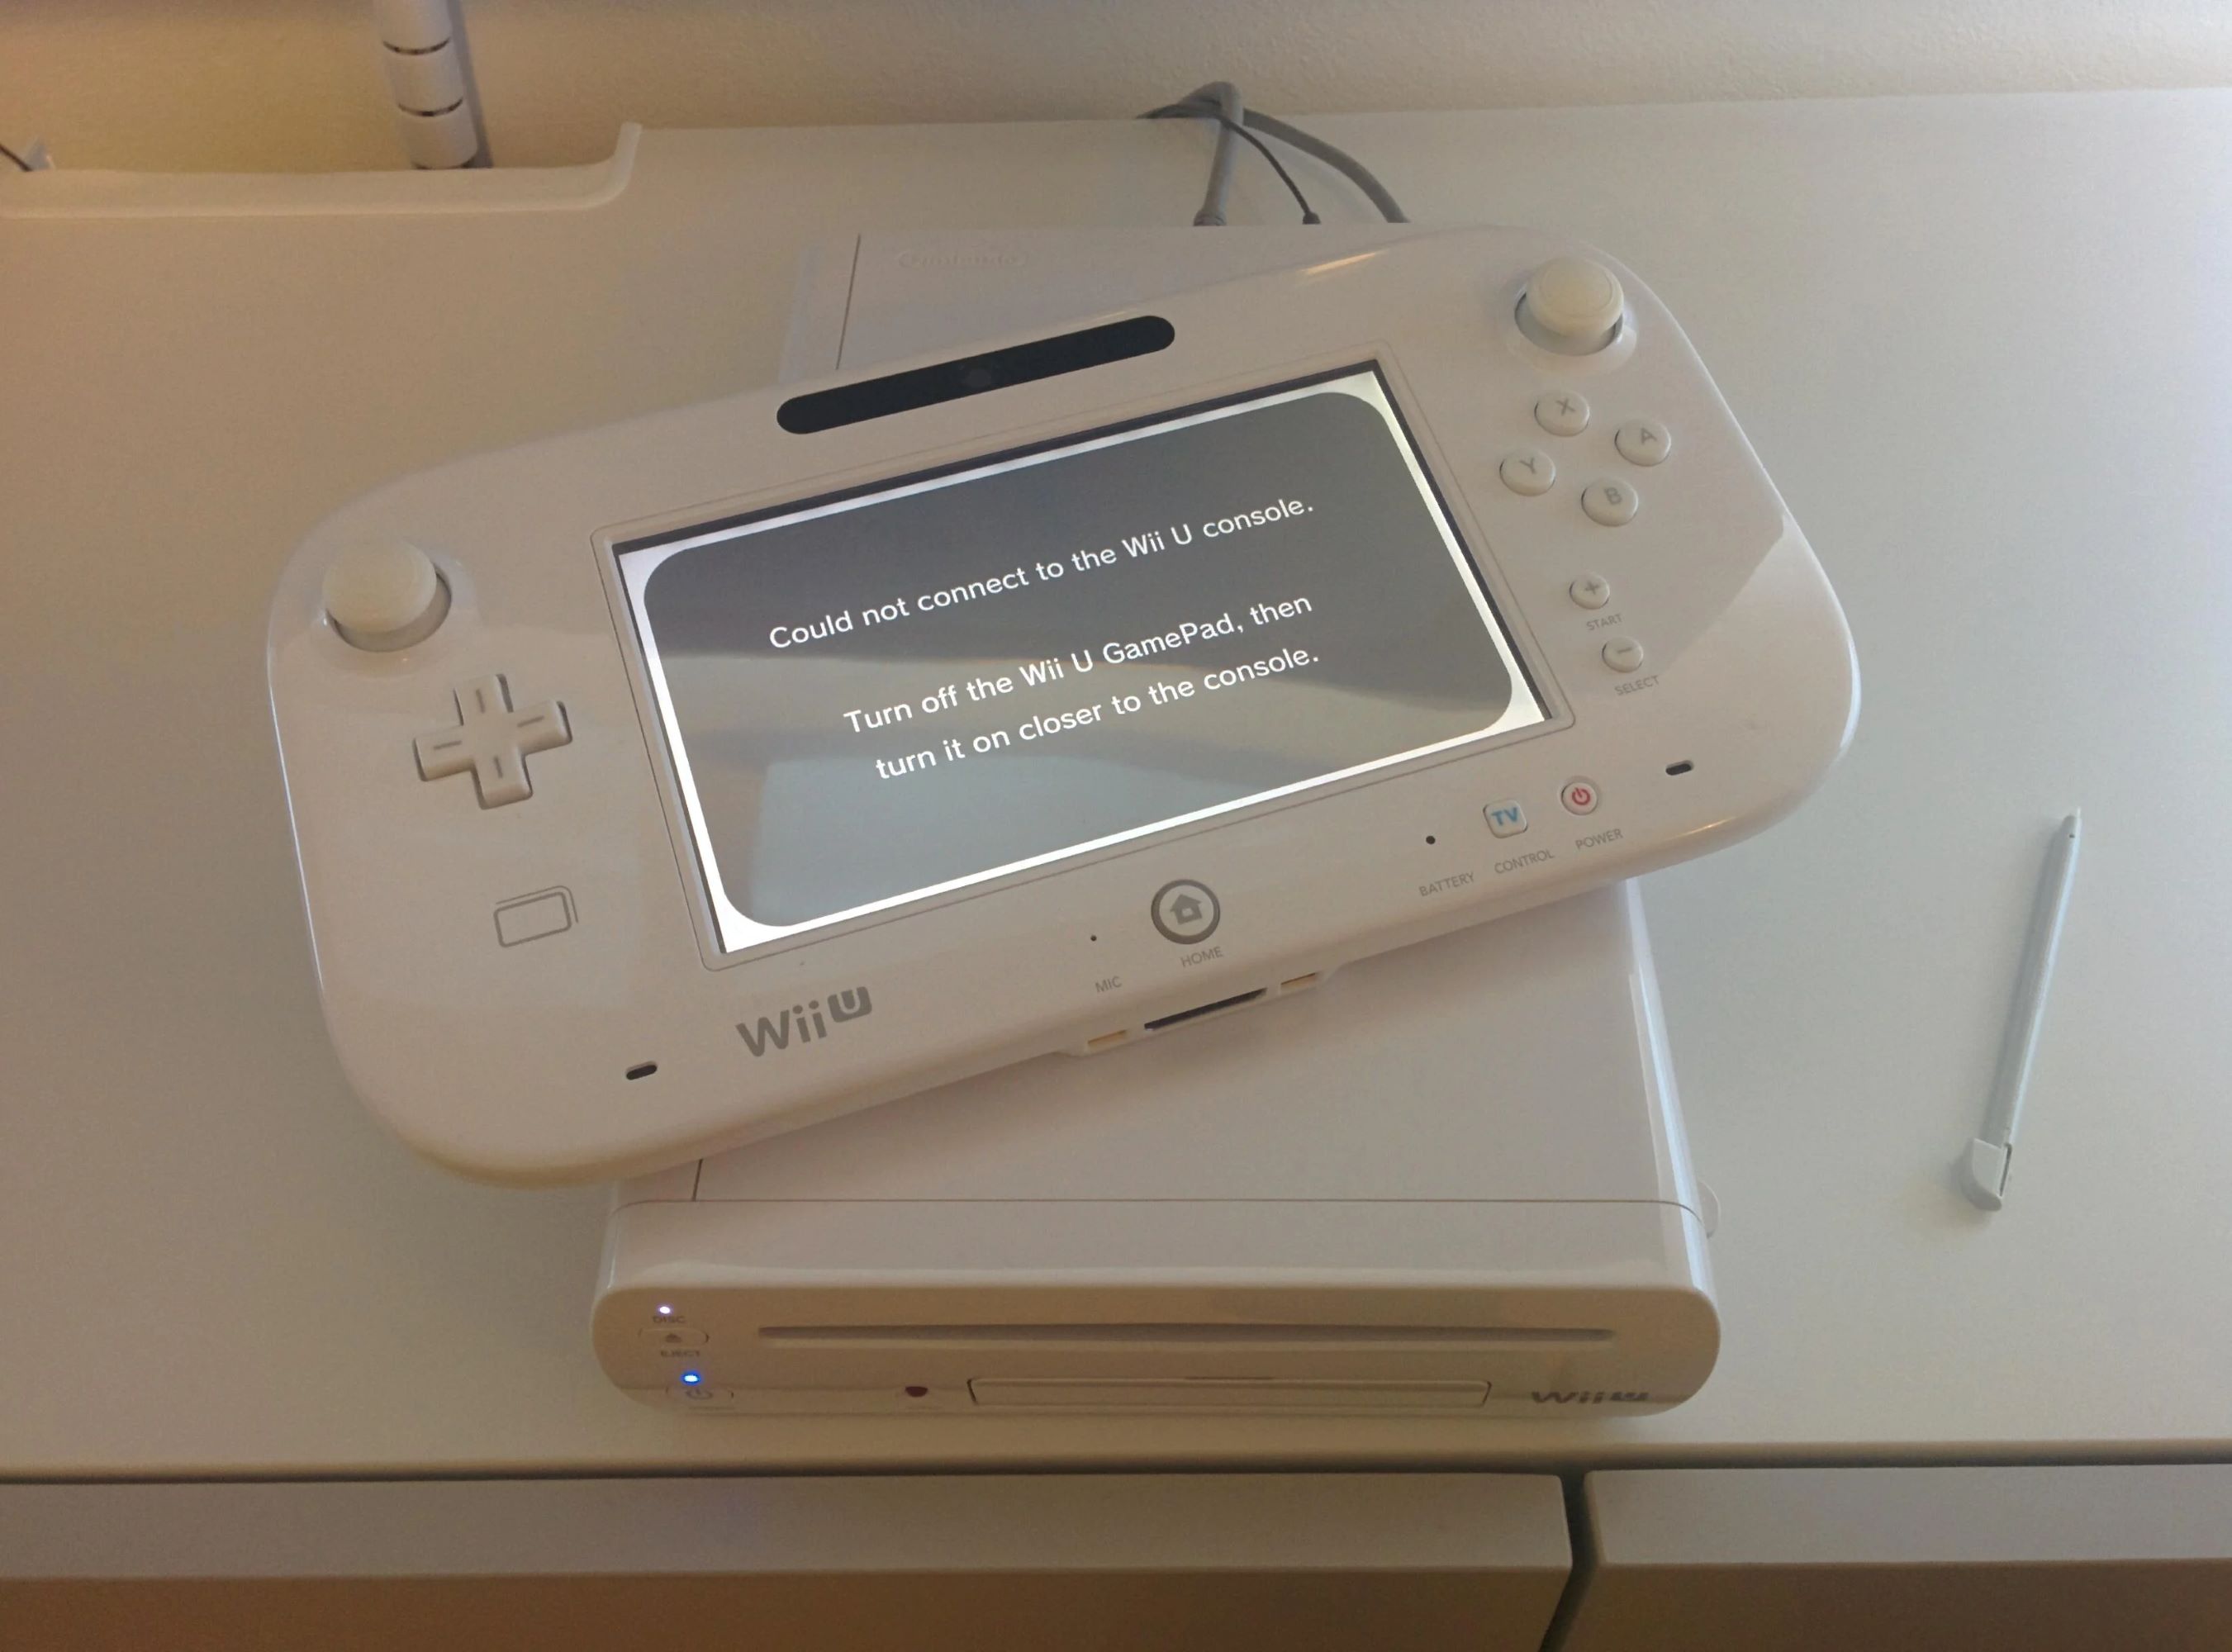 Fixing Wii U Gamepad Connection Problems: Troubleshooting